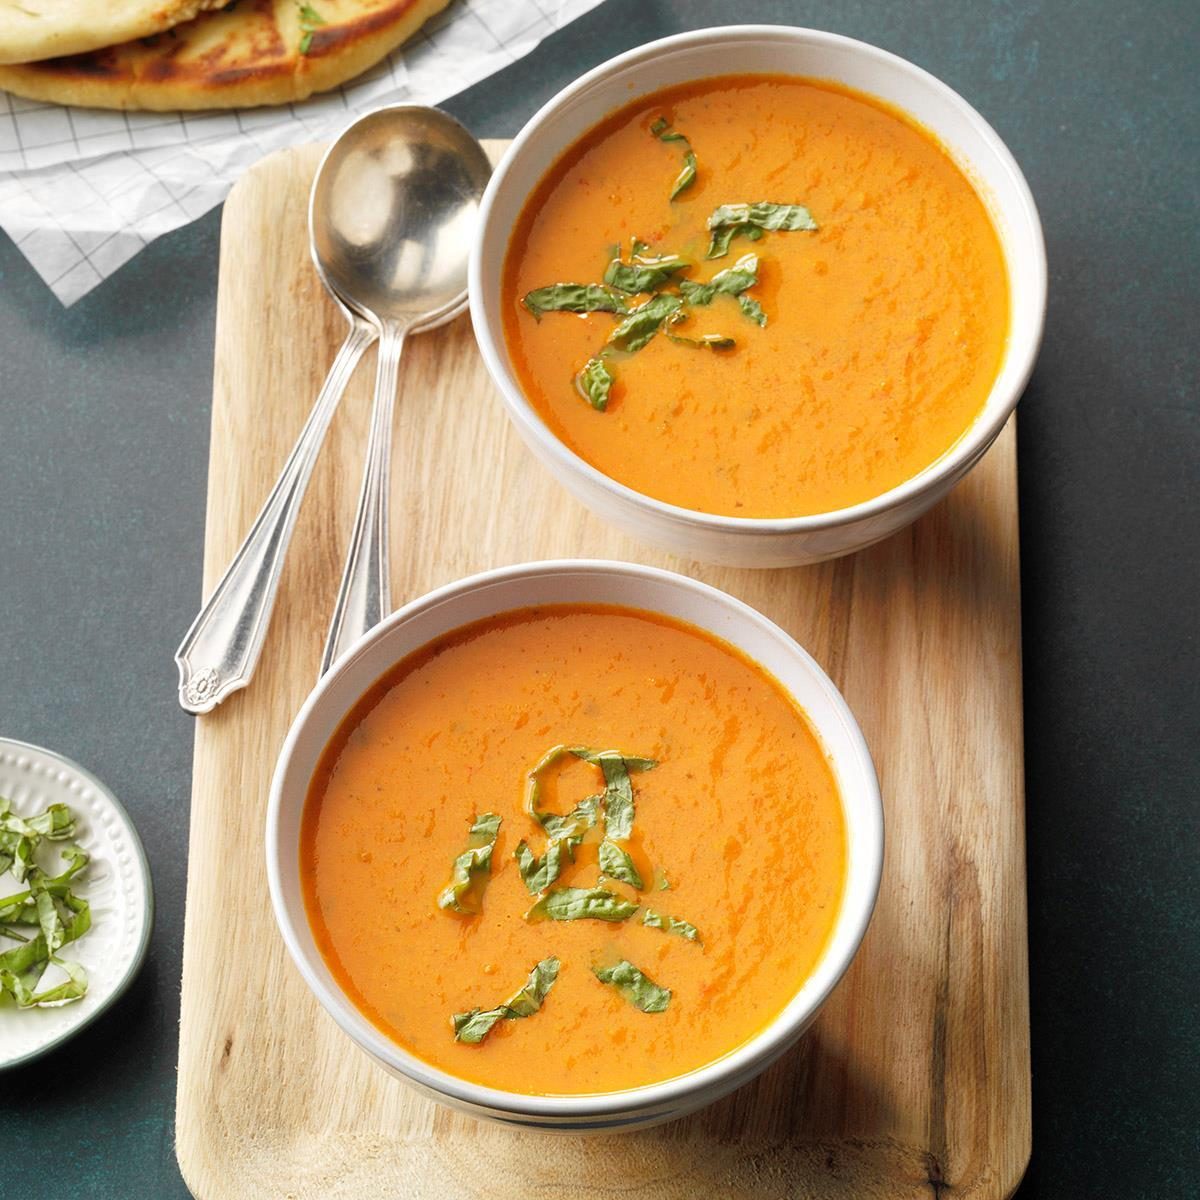 https://www.tasteofhome.com/wp-content/uploads/2018/01/Smoky-Spicy-Vegetable-Bisque_EXPS_THCA19_111508_E01_31_2b.jpg?fit=1024,1024